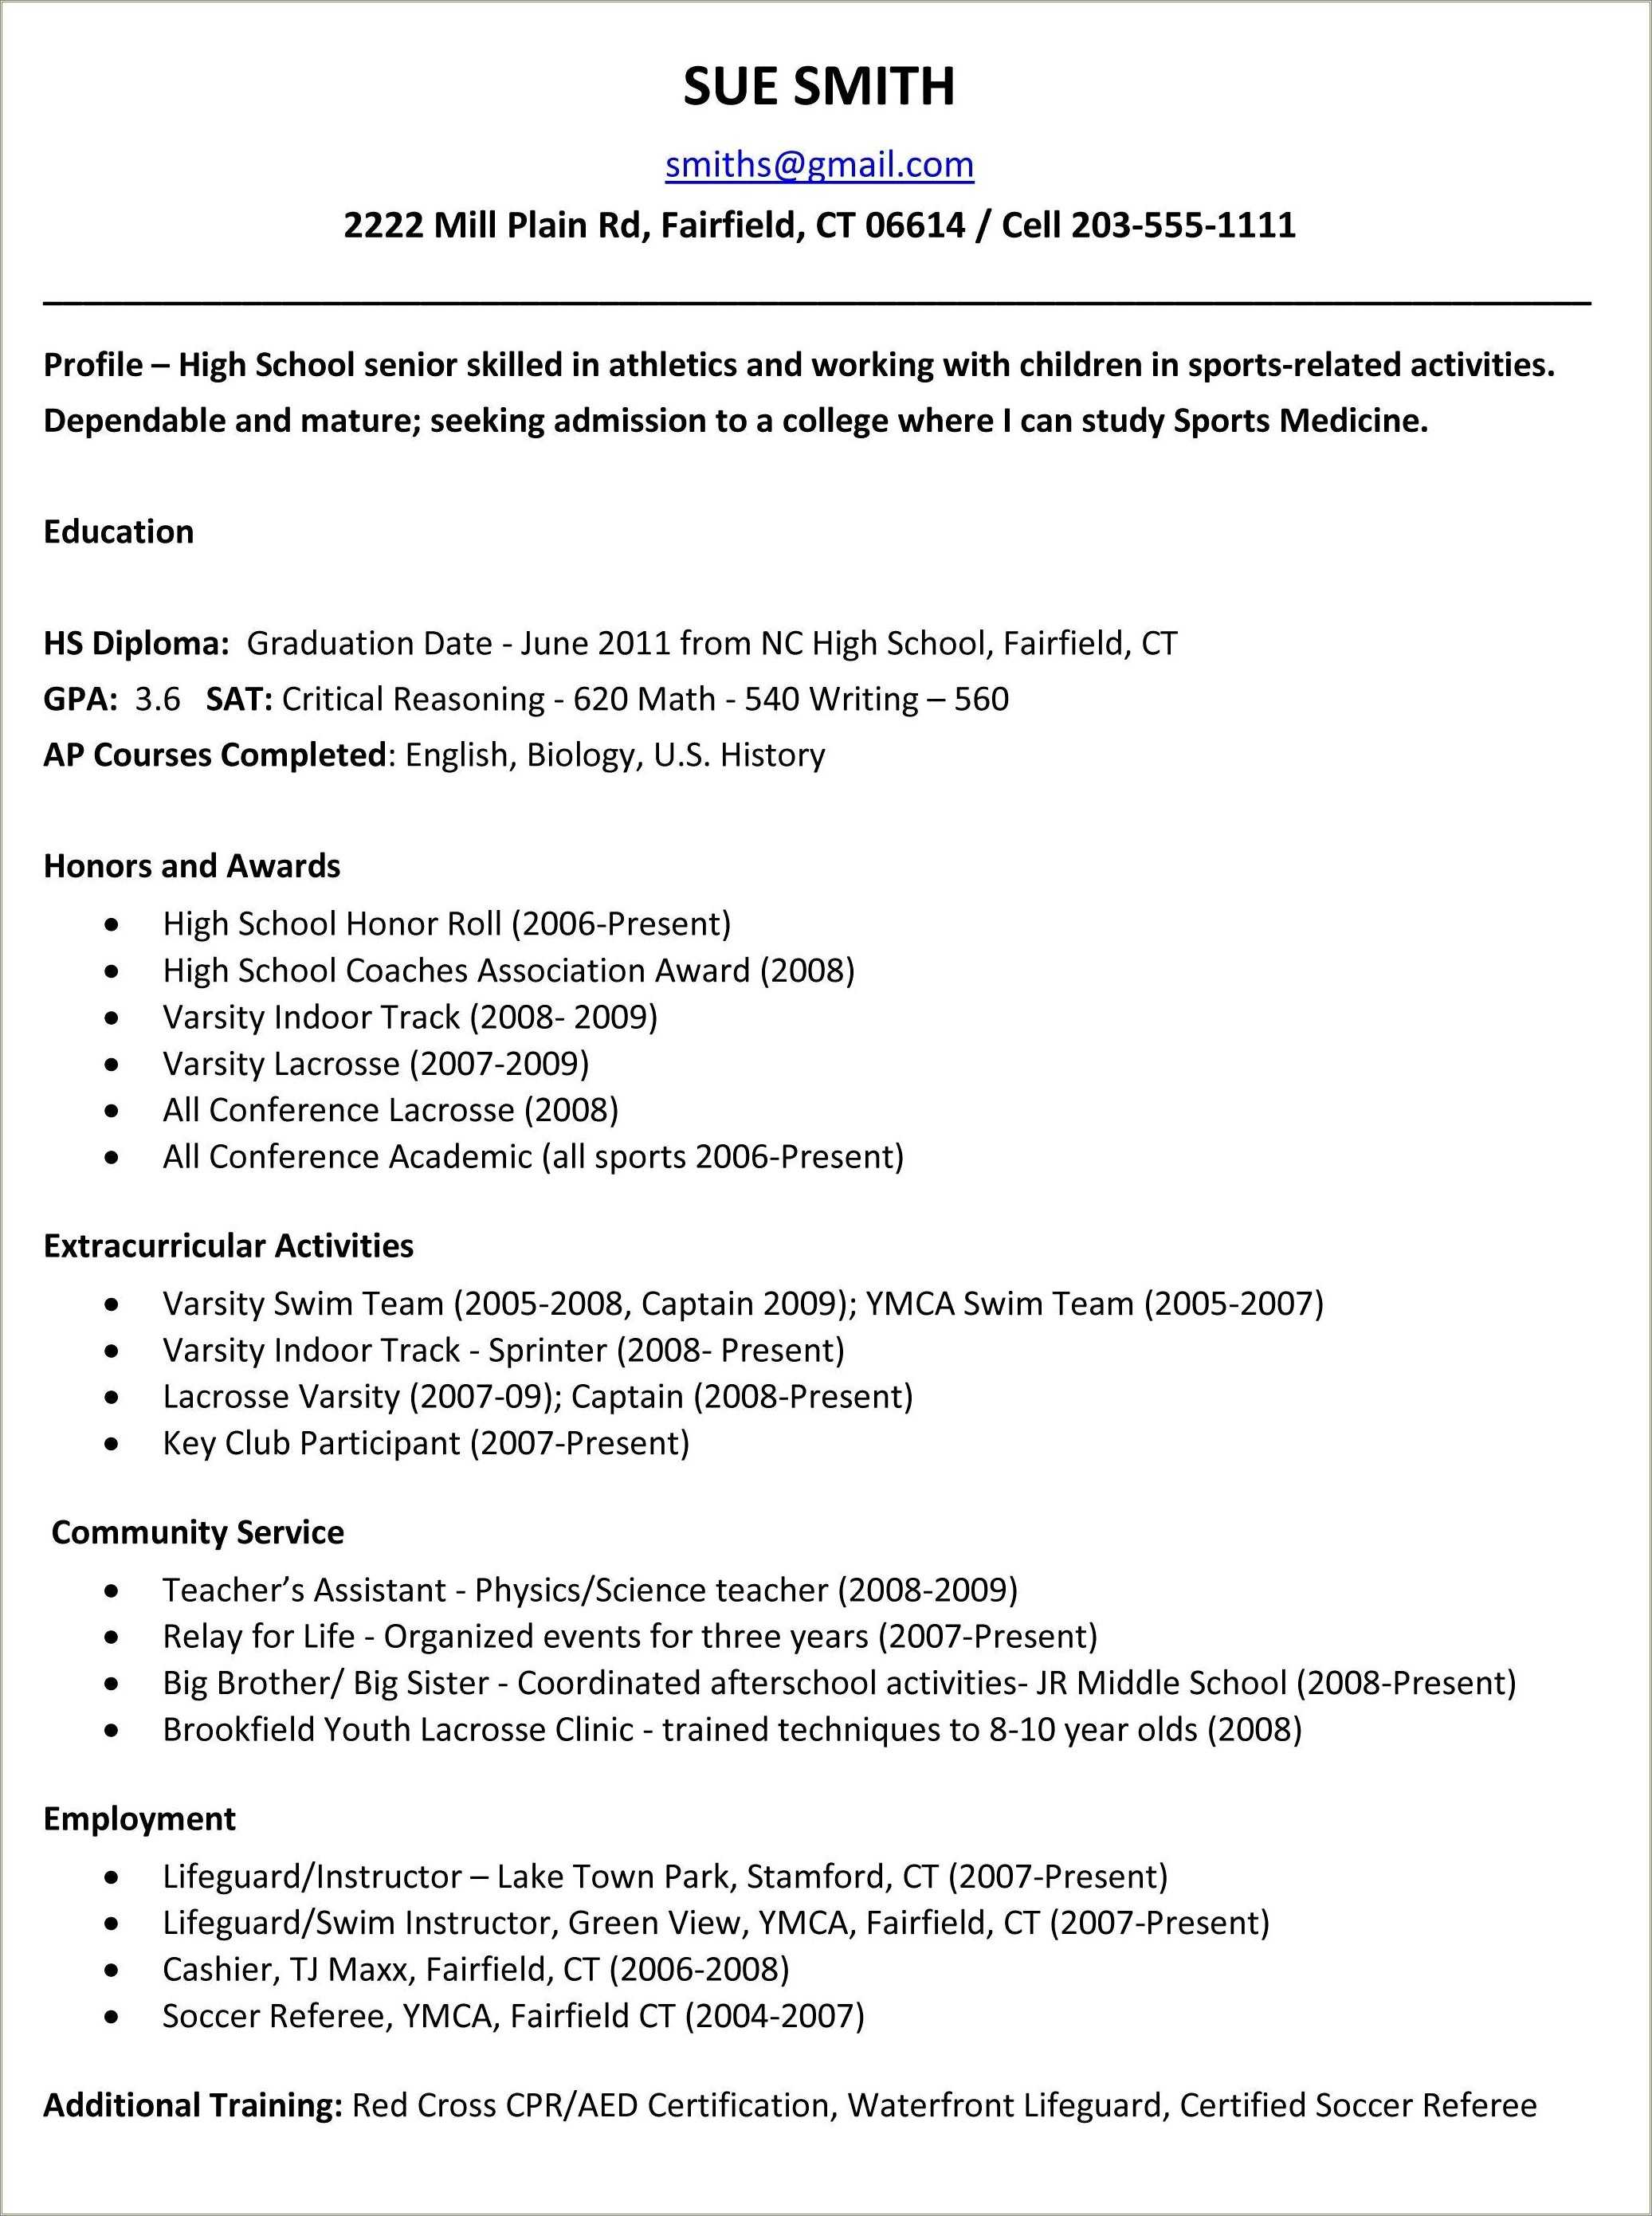 examples-of-professional-resumes-for-high-school-students-resume